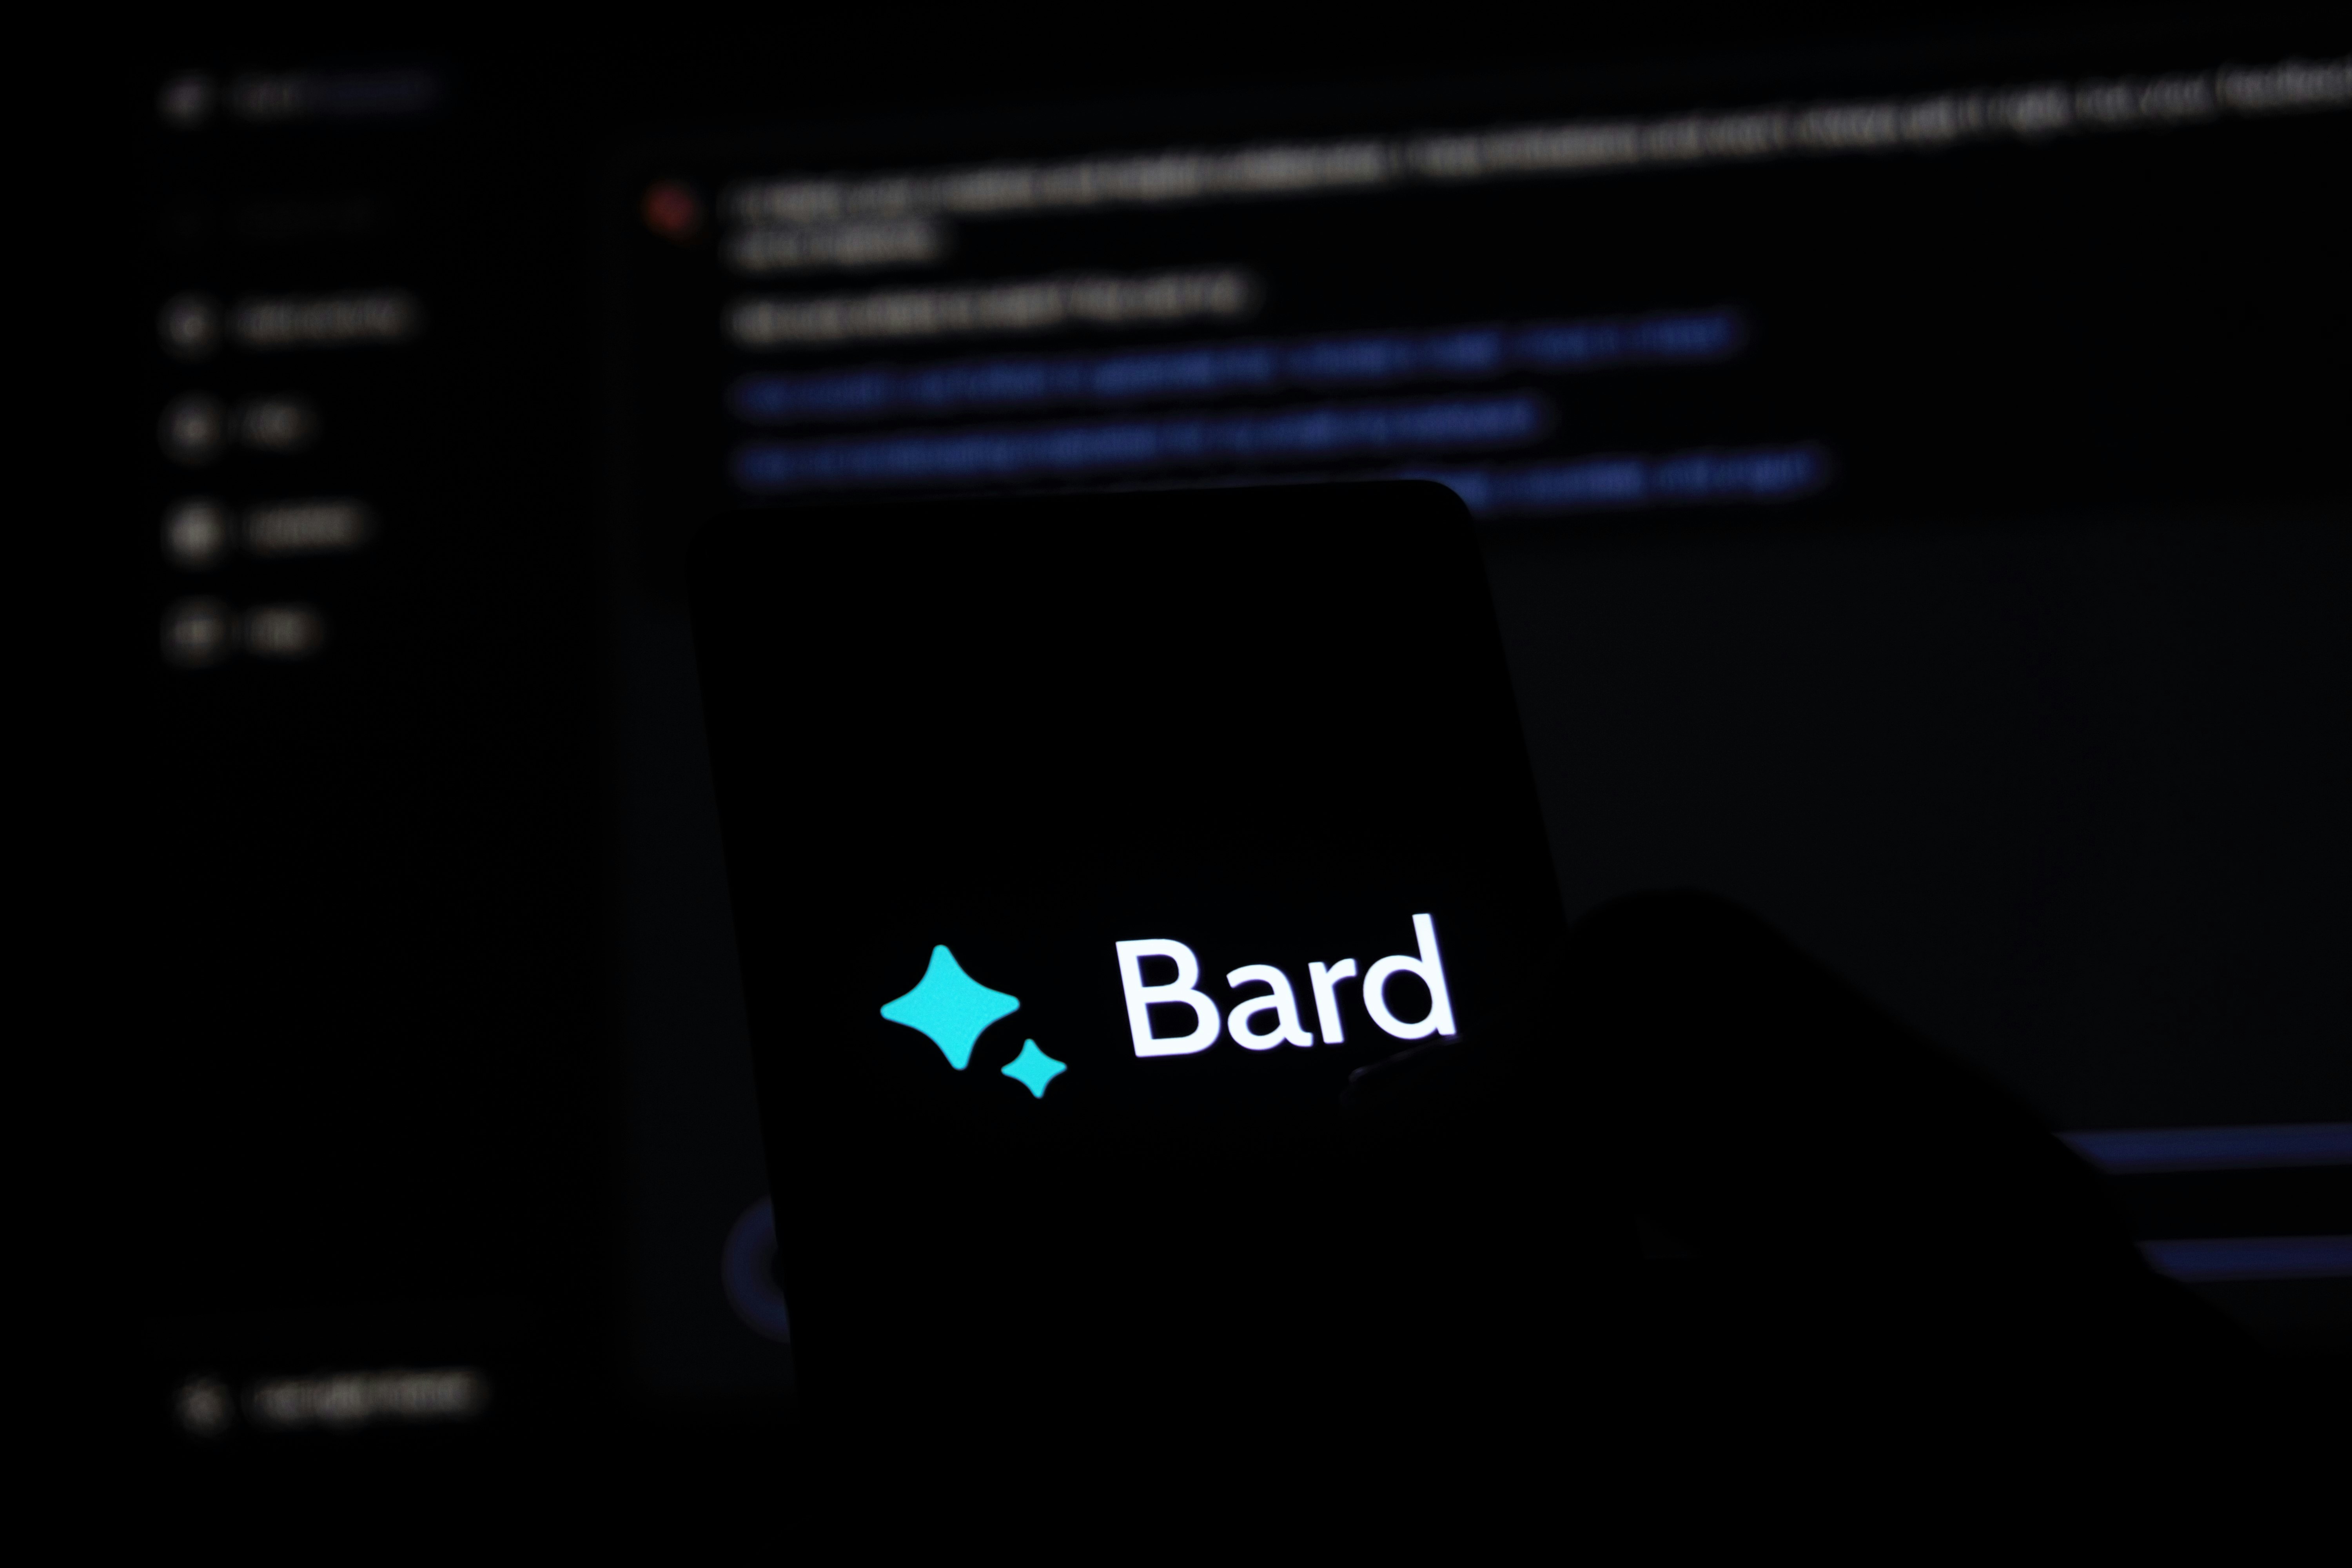 Bard has received Gemini Pro integration in all supported countries, as well as a free chat image generator based on Imagen 2